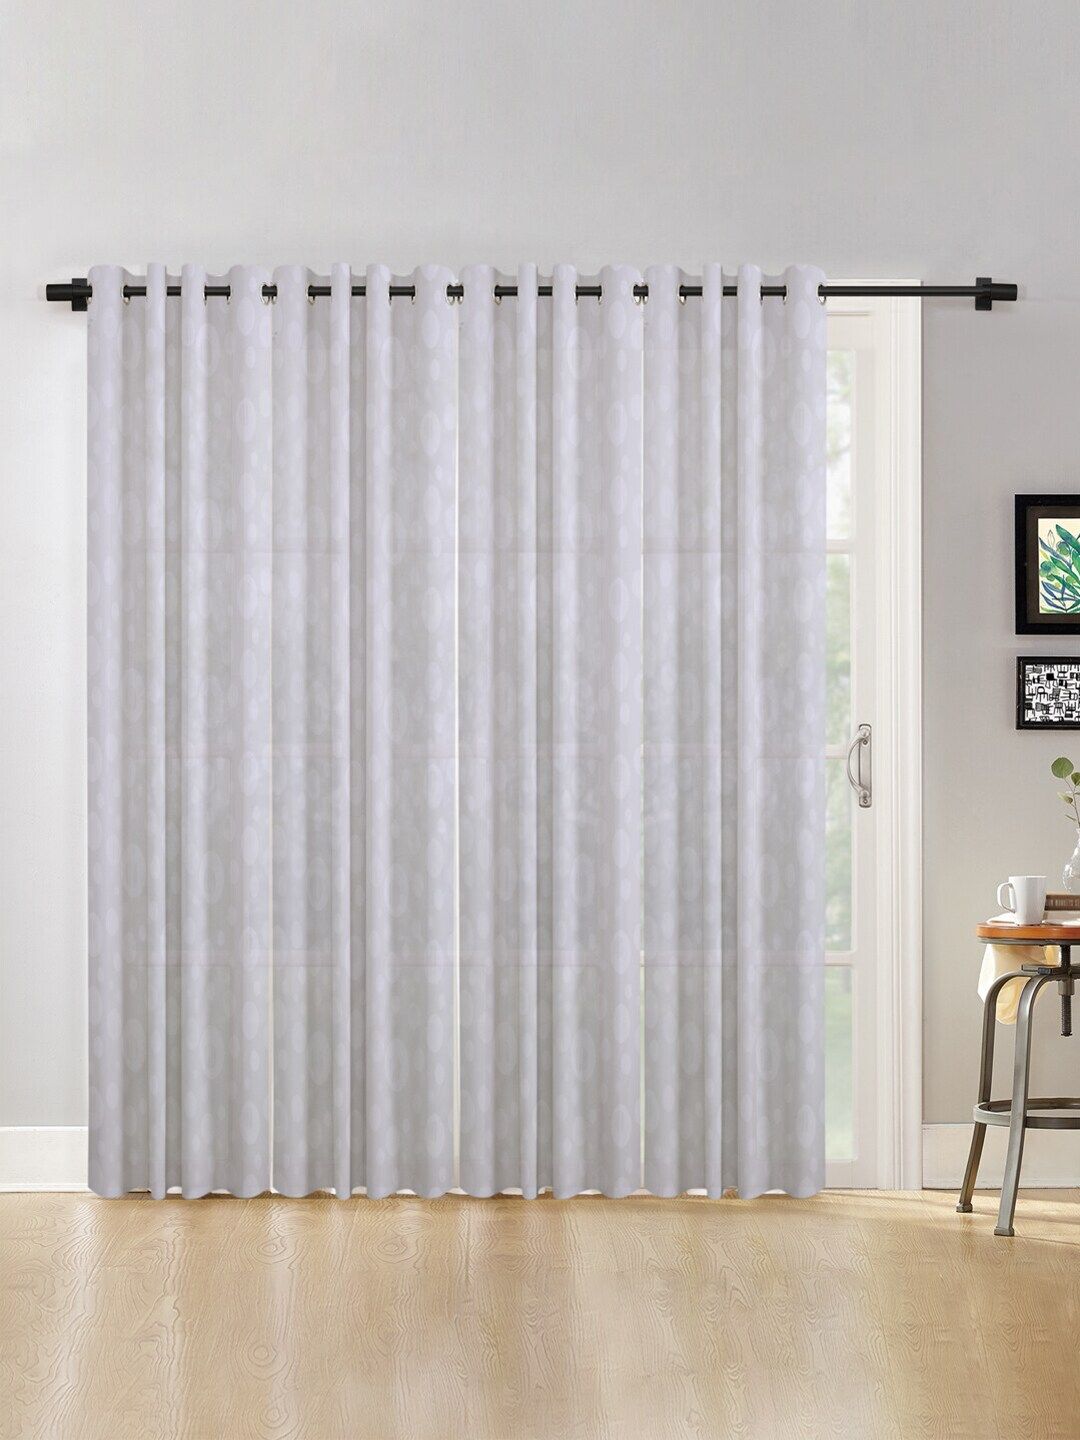 HOSTA HOMES White Set of 4 Long Door Curtain Price in India